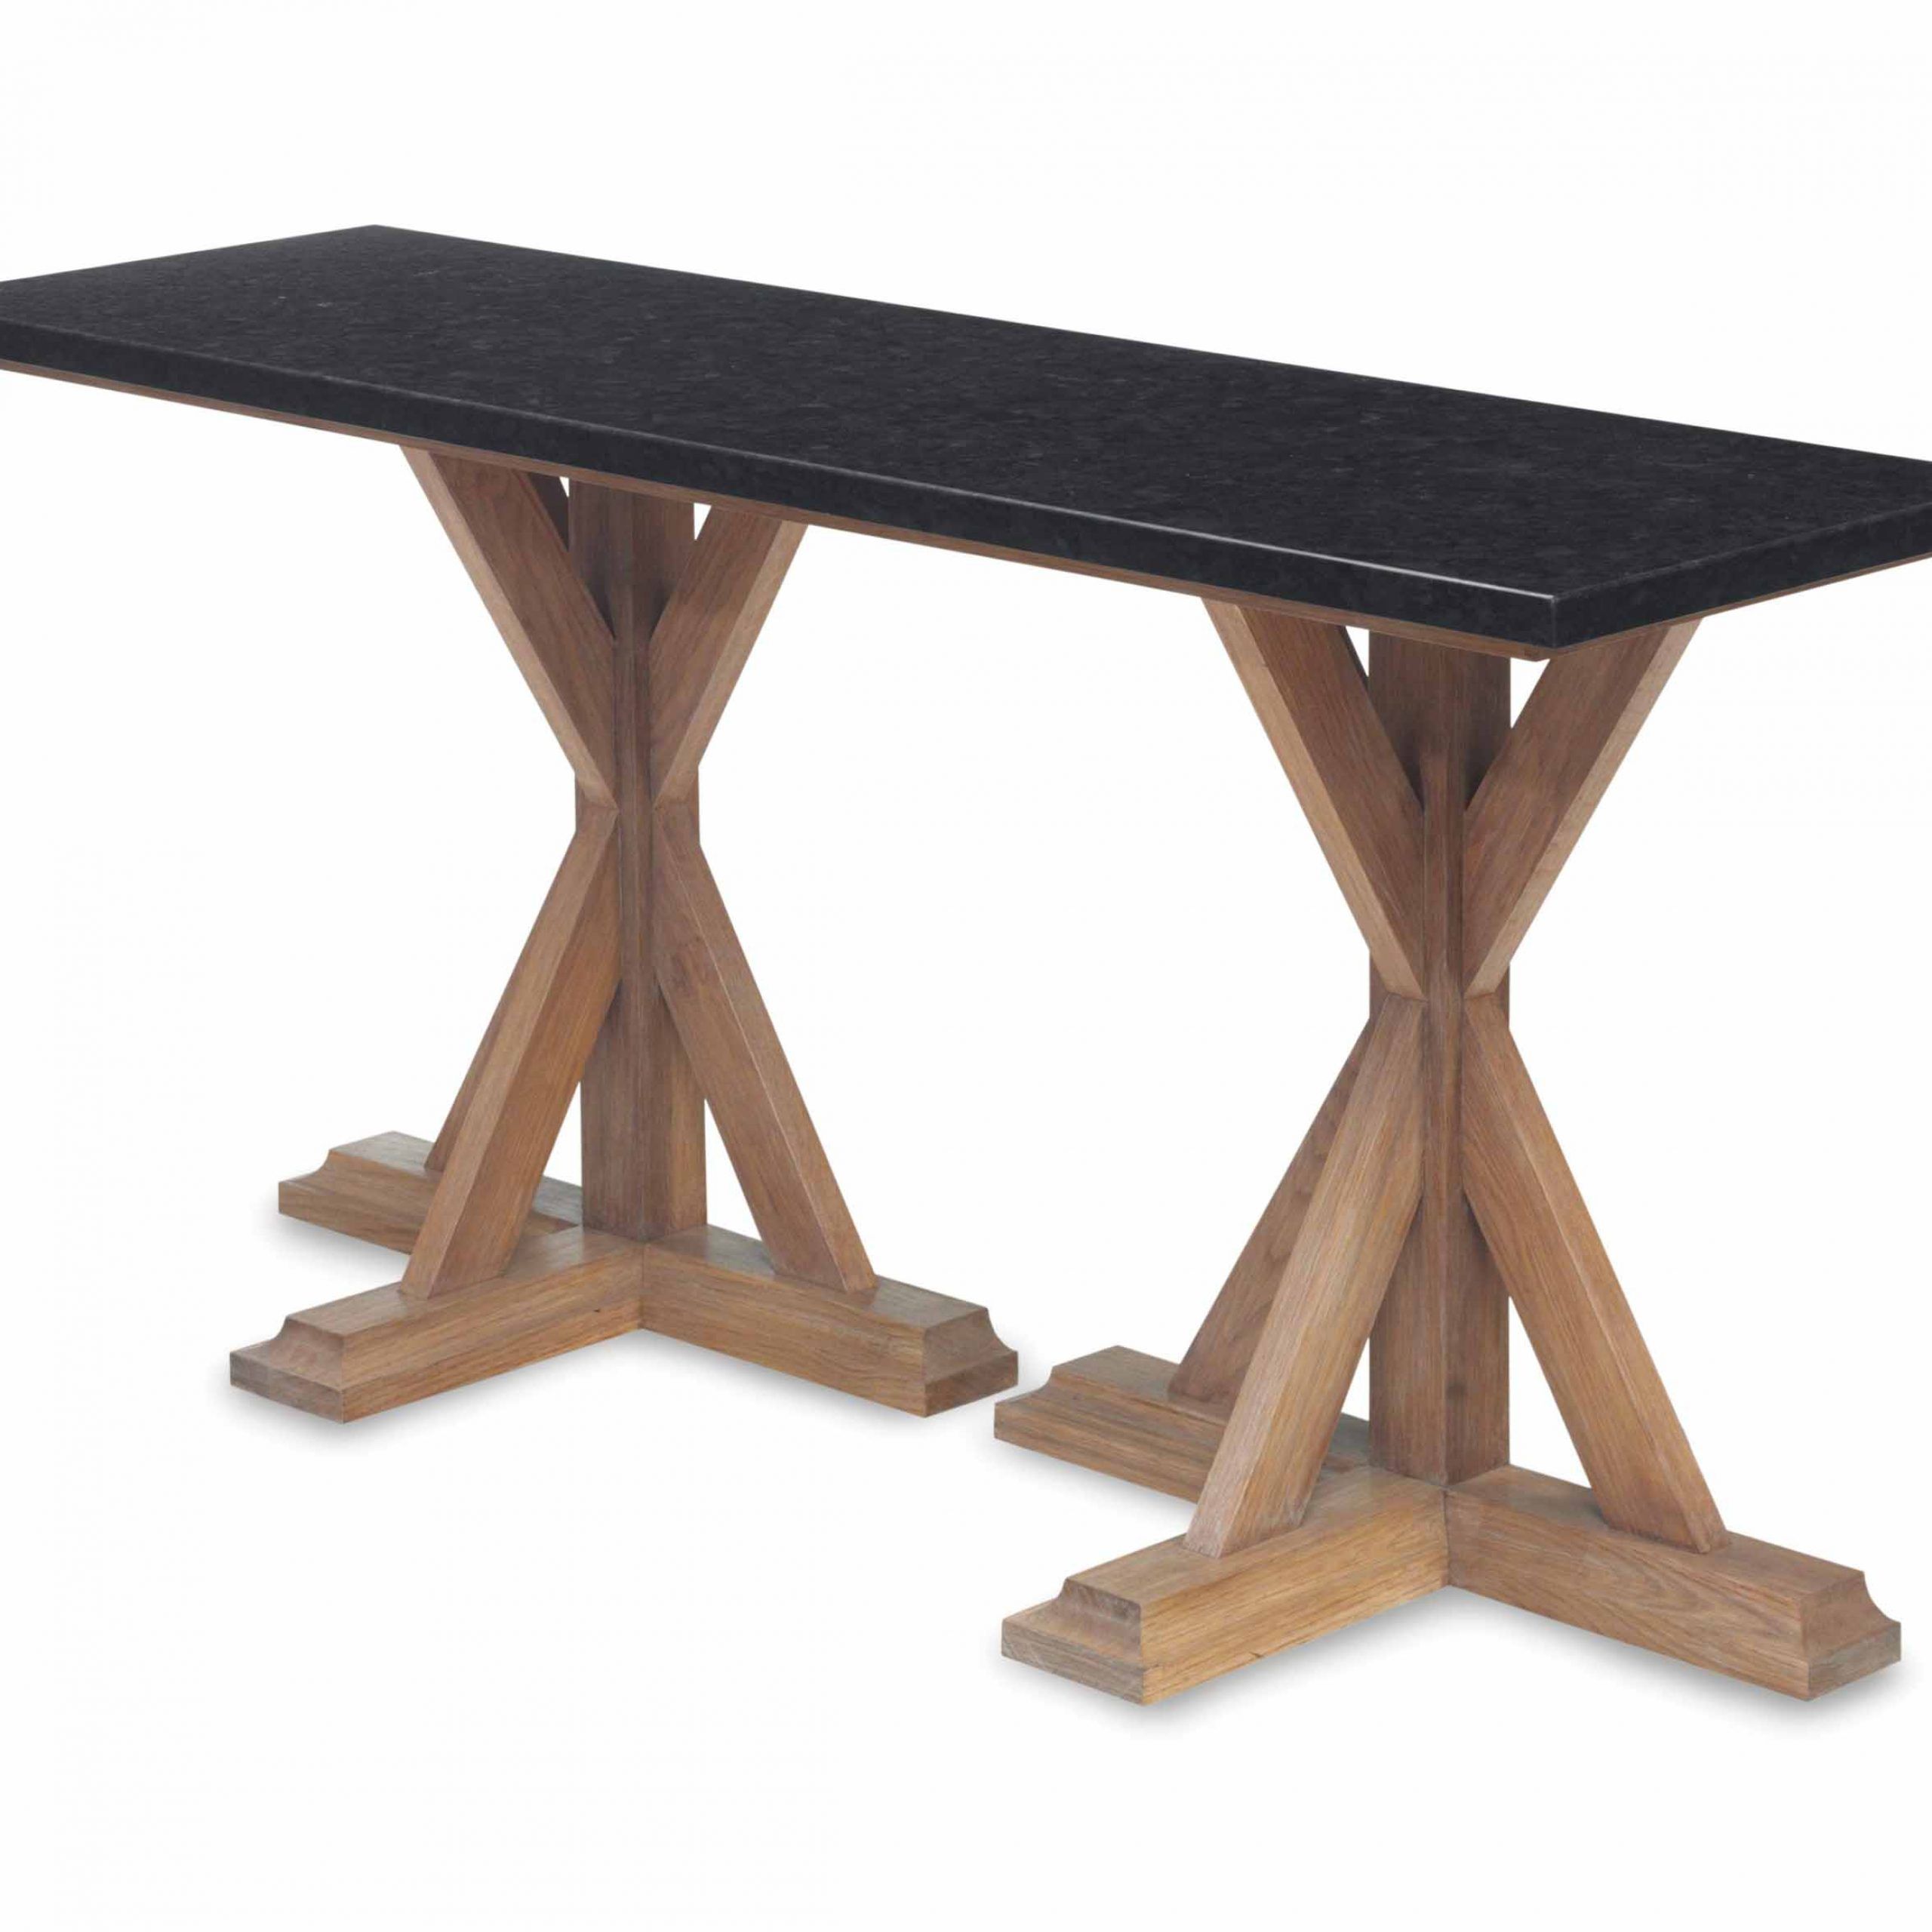 A Limed Oak And Stone Top Console Table, , 20th Century Intended For Honey Oak And Marble Console Tables (View 18 of 20)